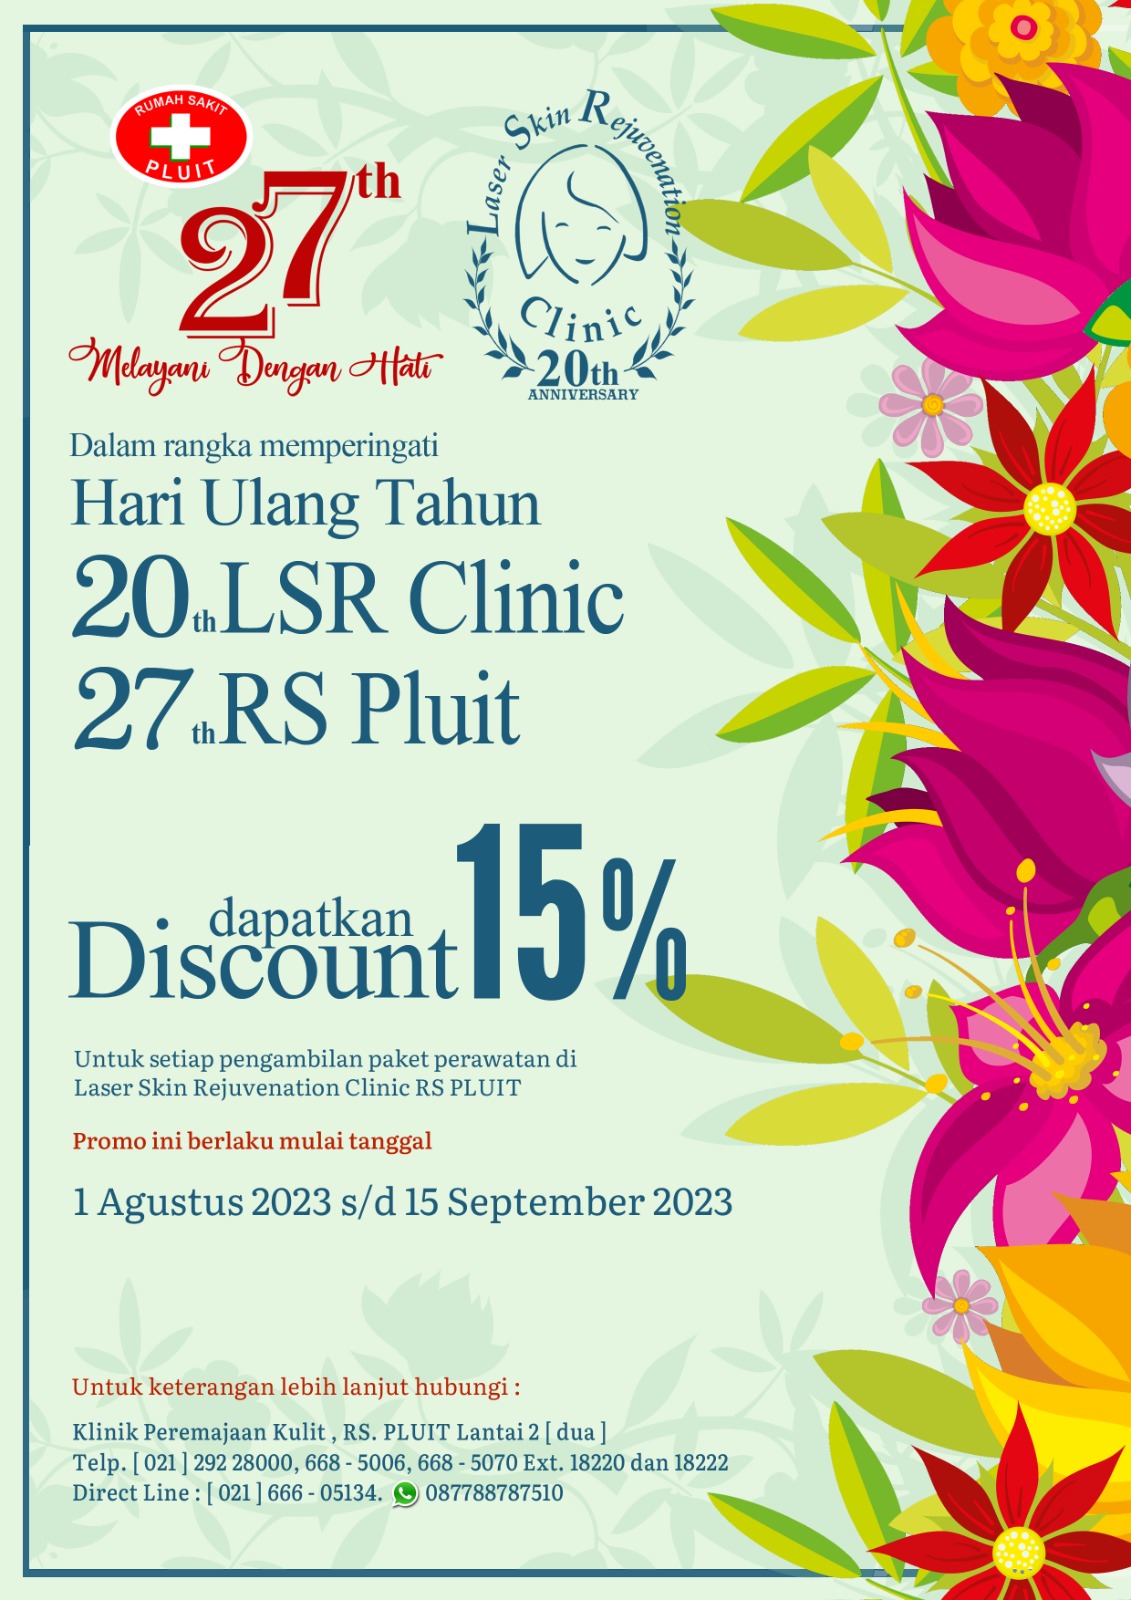 Discount 15% Happy Anniversary LSR Clinic